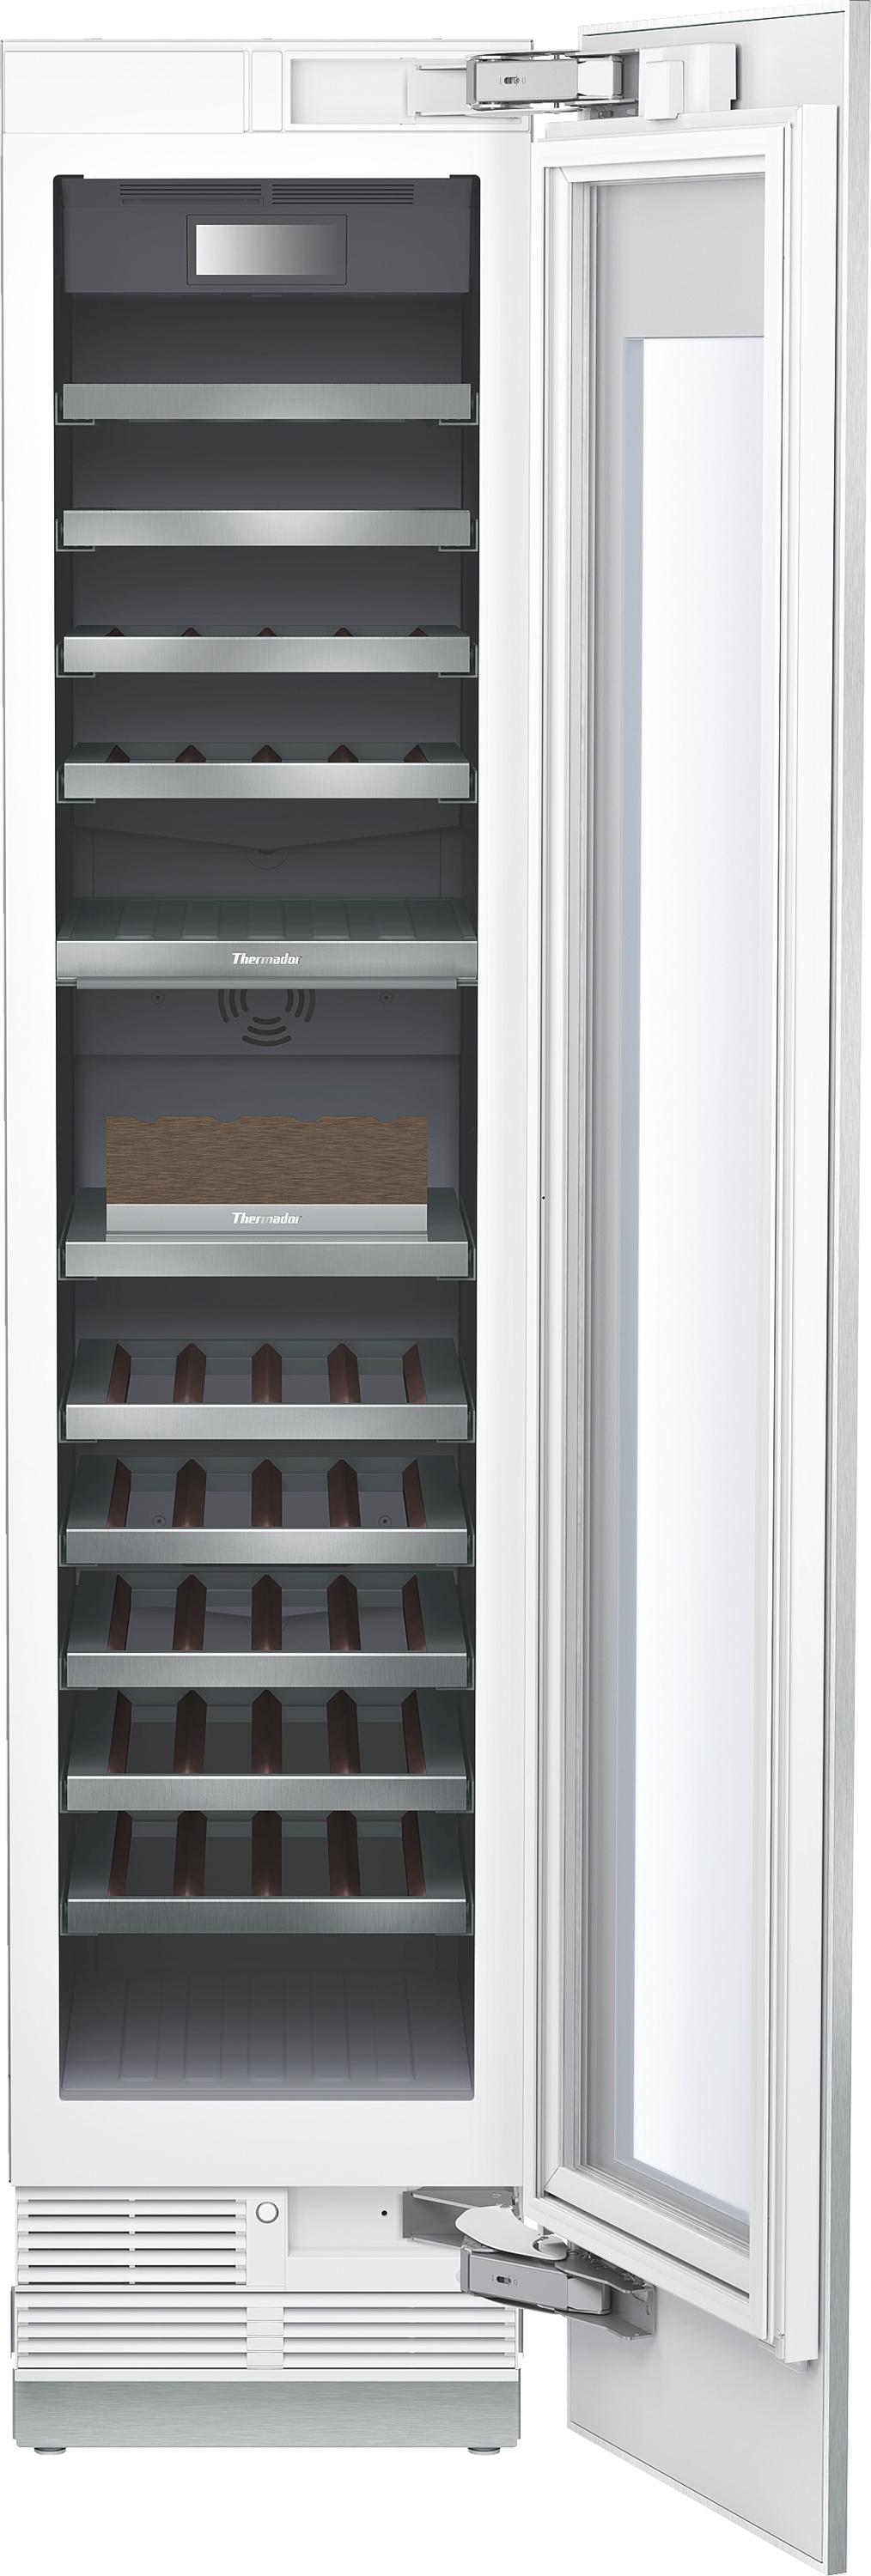 Thermador - 17.75 Inch 58 Bottles Built In / Integrated Wine Fridge Refrigerator in Panel Ready - T18IW905SP